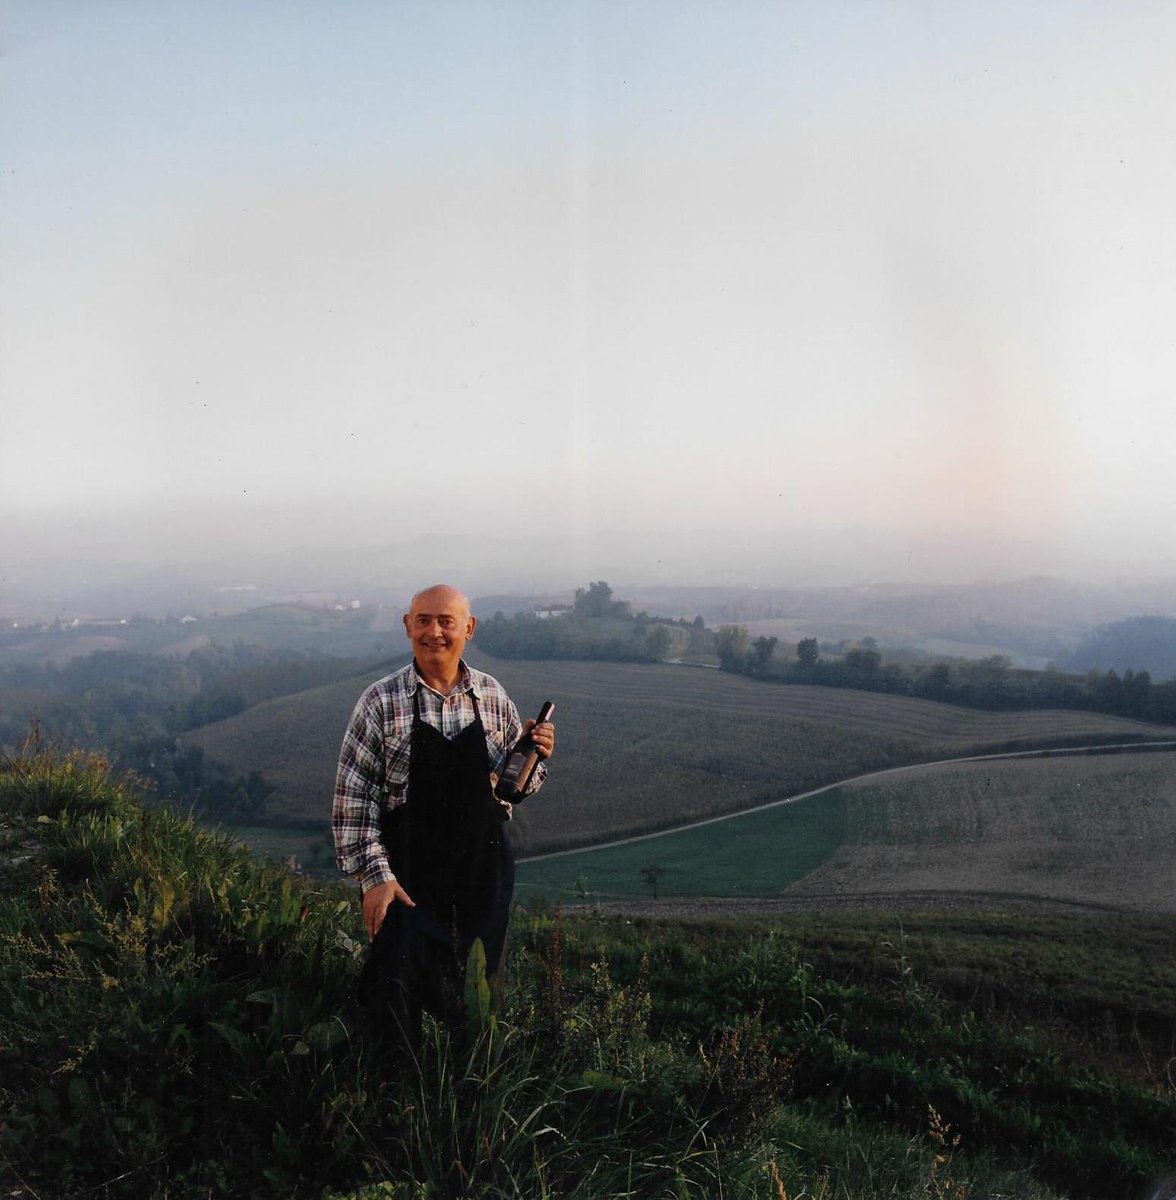 In 1991, Elvio Cogno has been the pioneer of the MGA Ravera: foreseeing the still unexpressed potential of this great cru, he was the first to produce a Barolo bearing the name of the Mention 'Ravera' on the label.
#elviocogno #baroloravera #barolowine